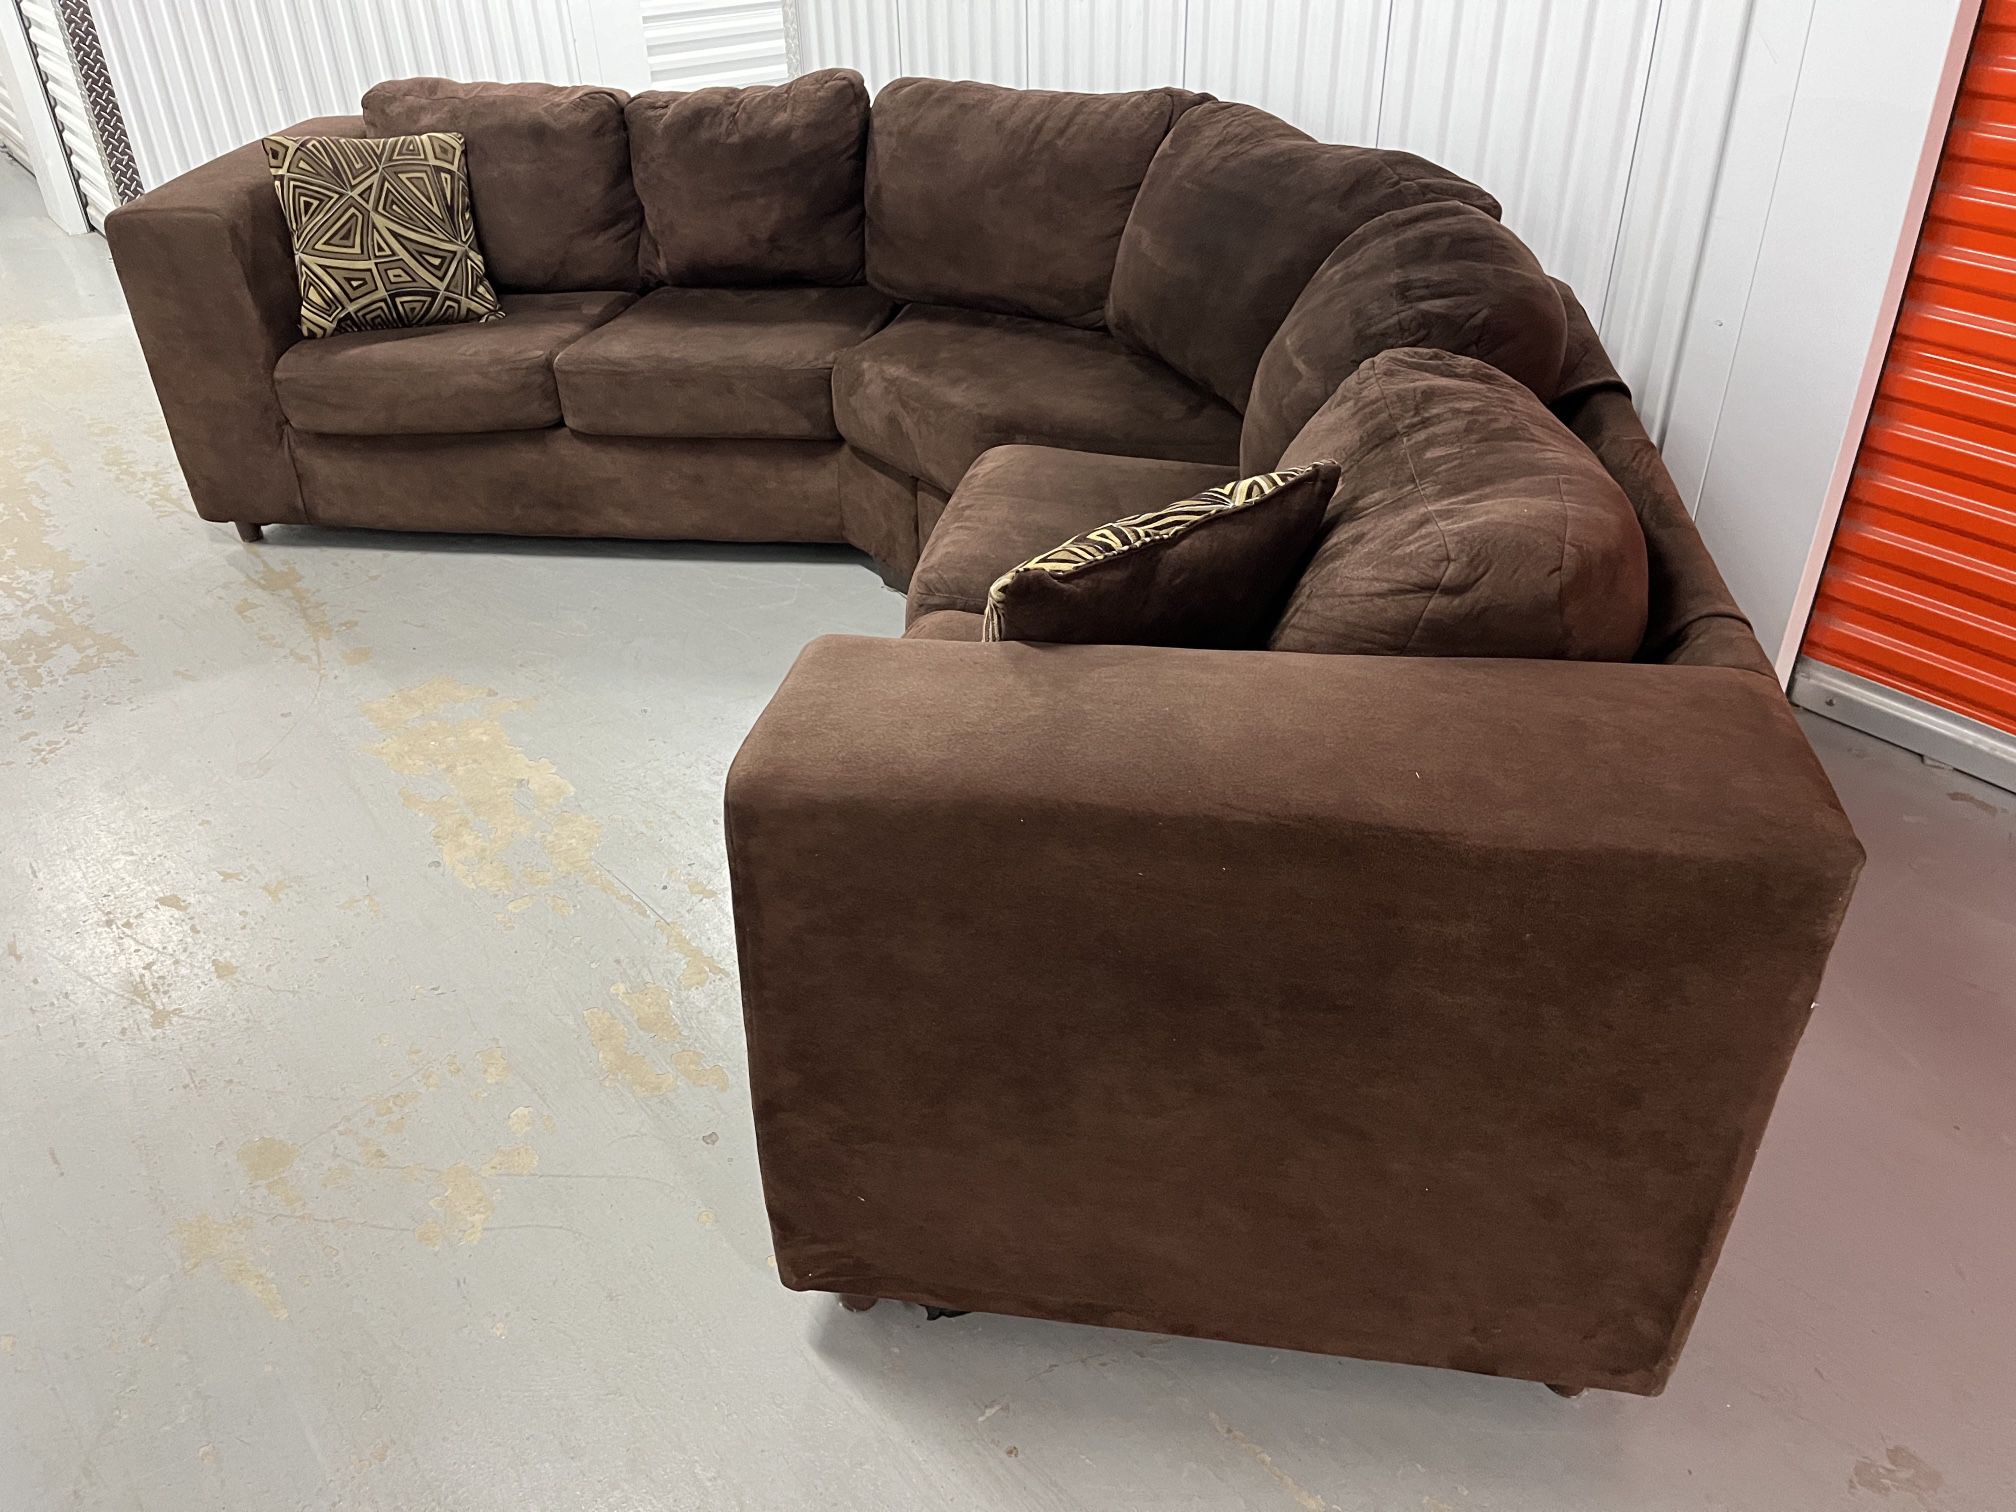 Two Piece Microsuede Sectional Sofa In Excellent Condition Made By Prime Designs